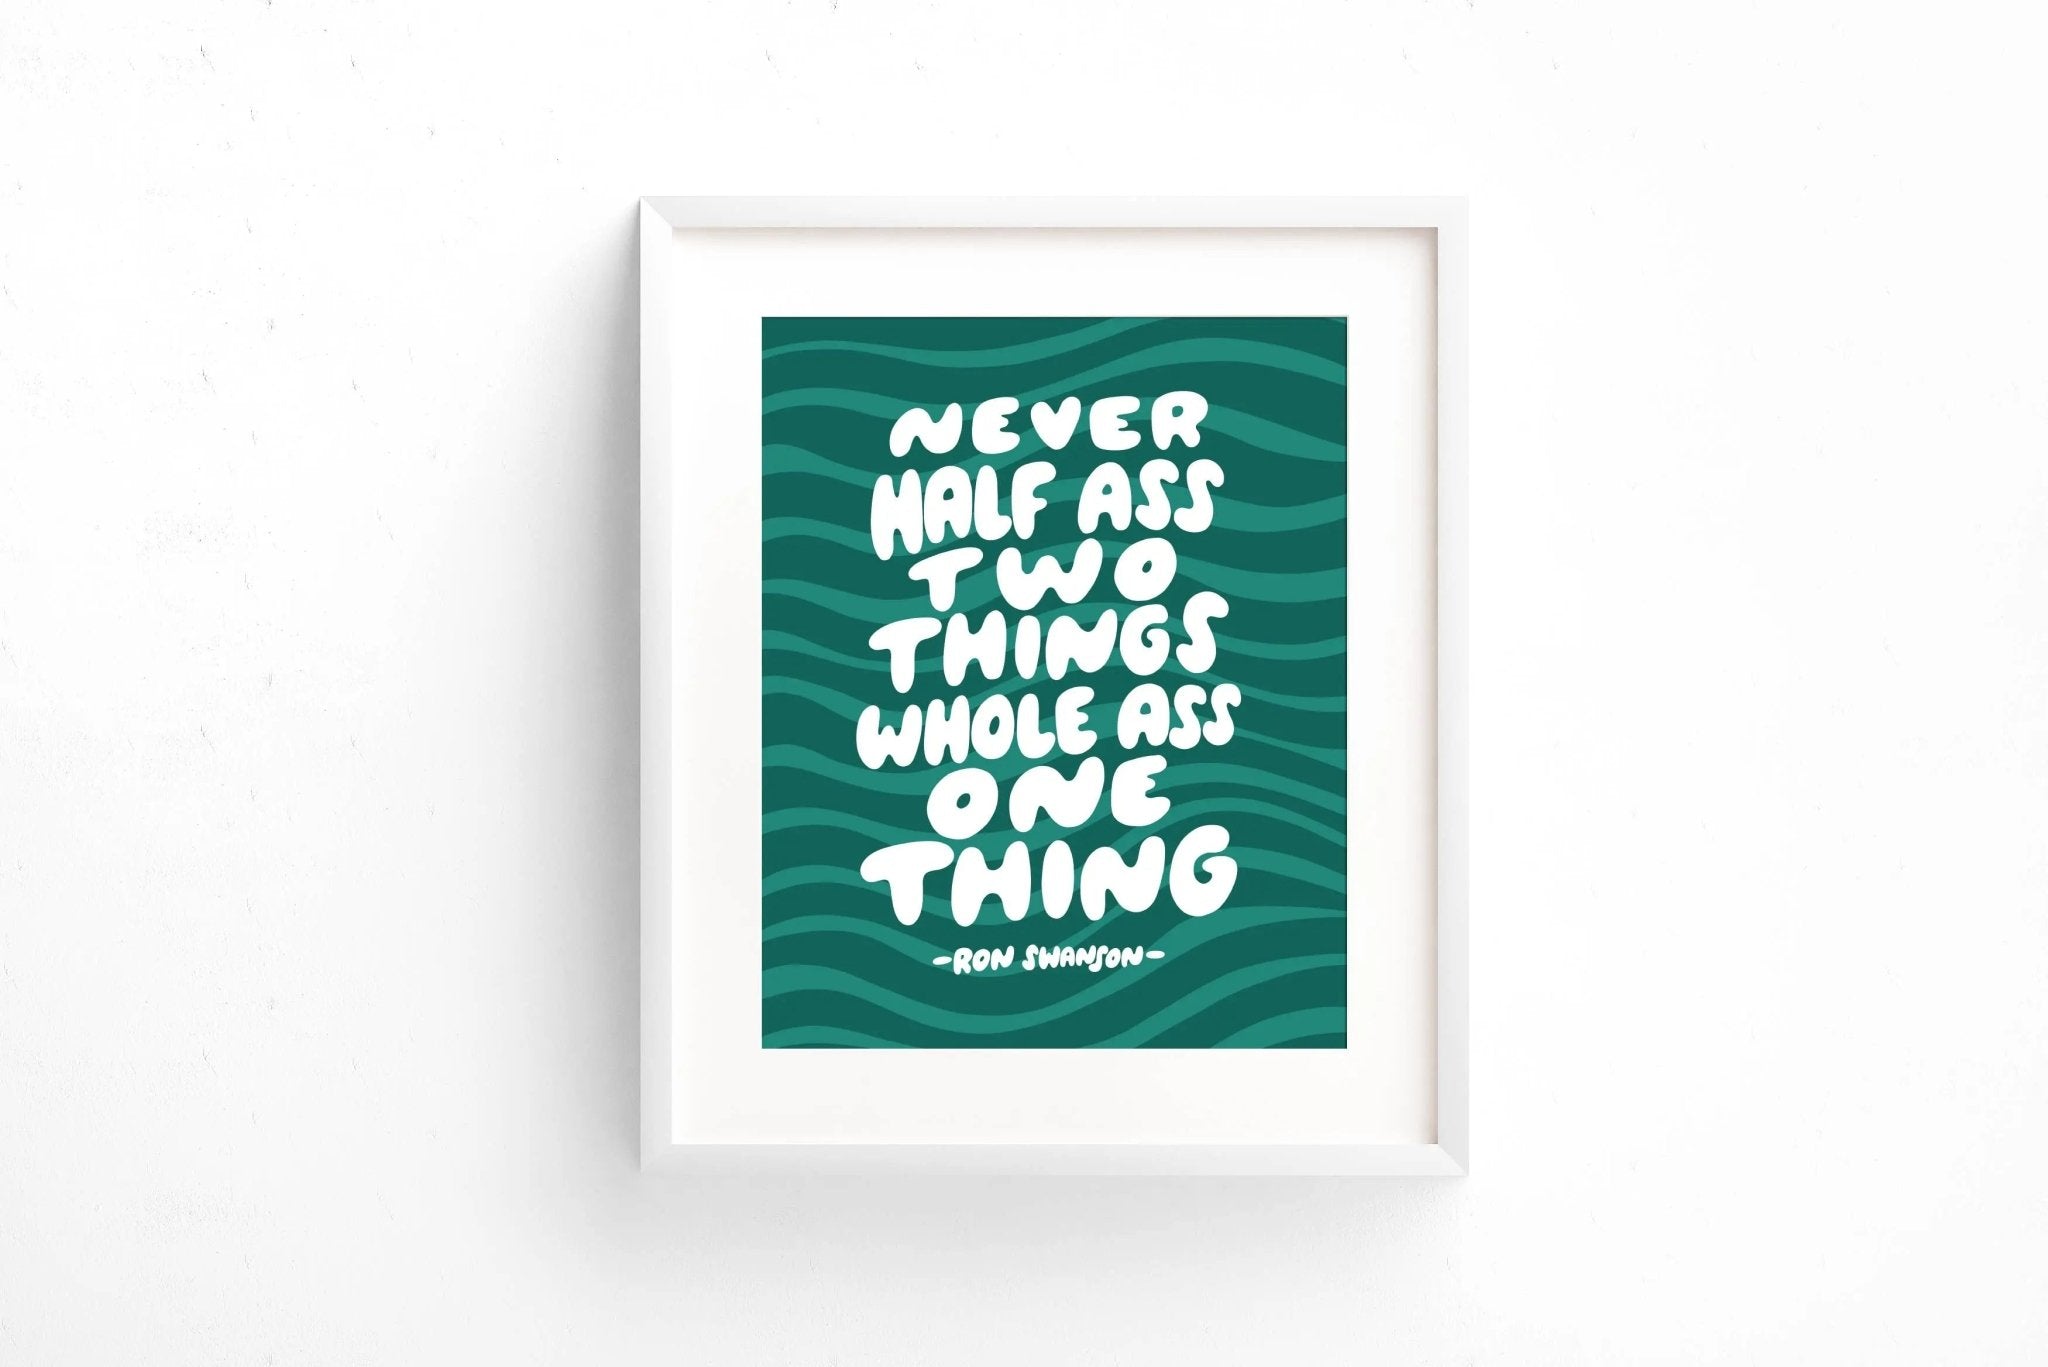 Whole Ass One Thing Parks & Rec Art Print - Floret + Foliage Flower delivery in Fargo, North Dakota